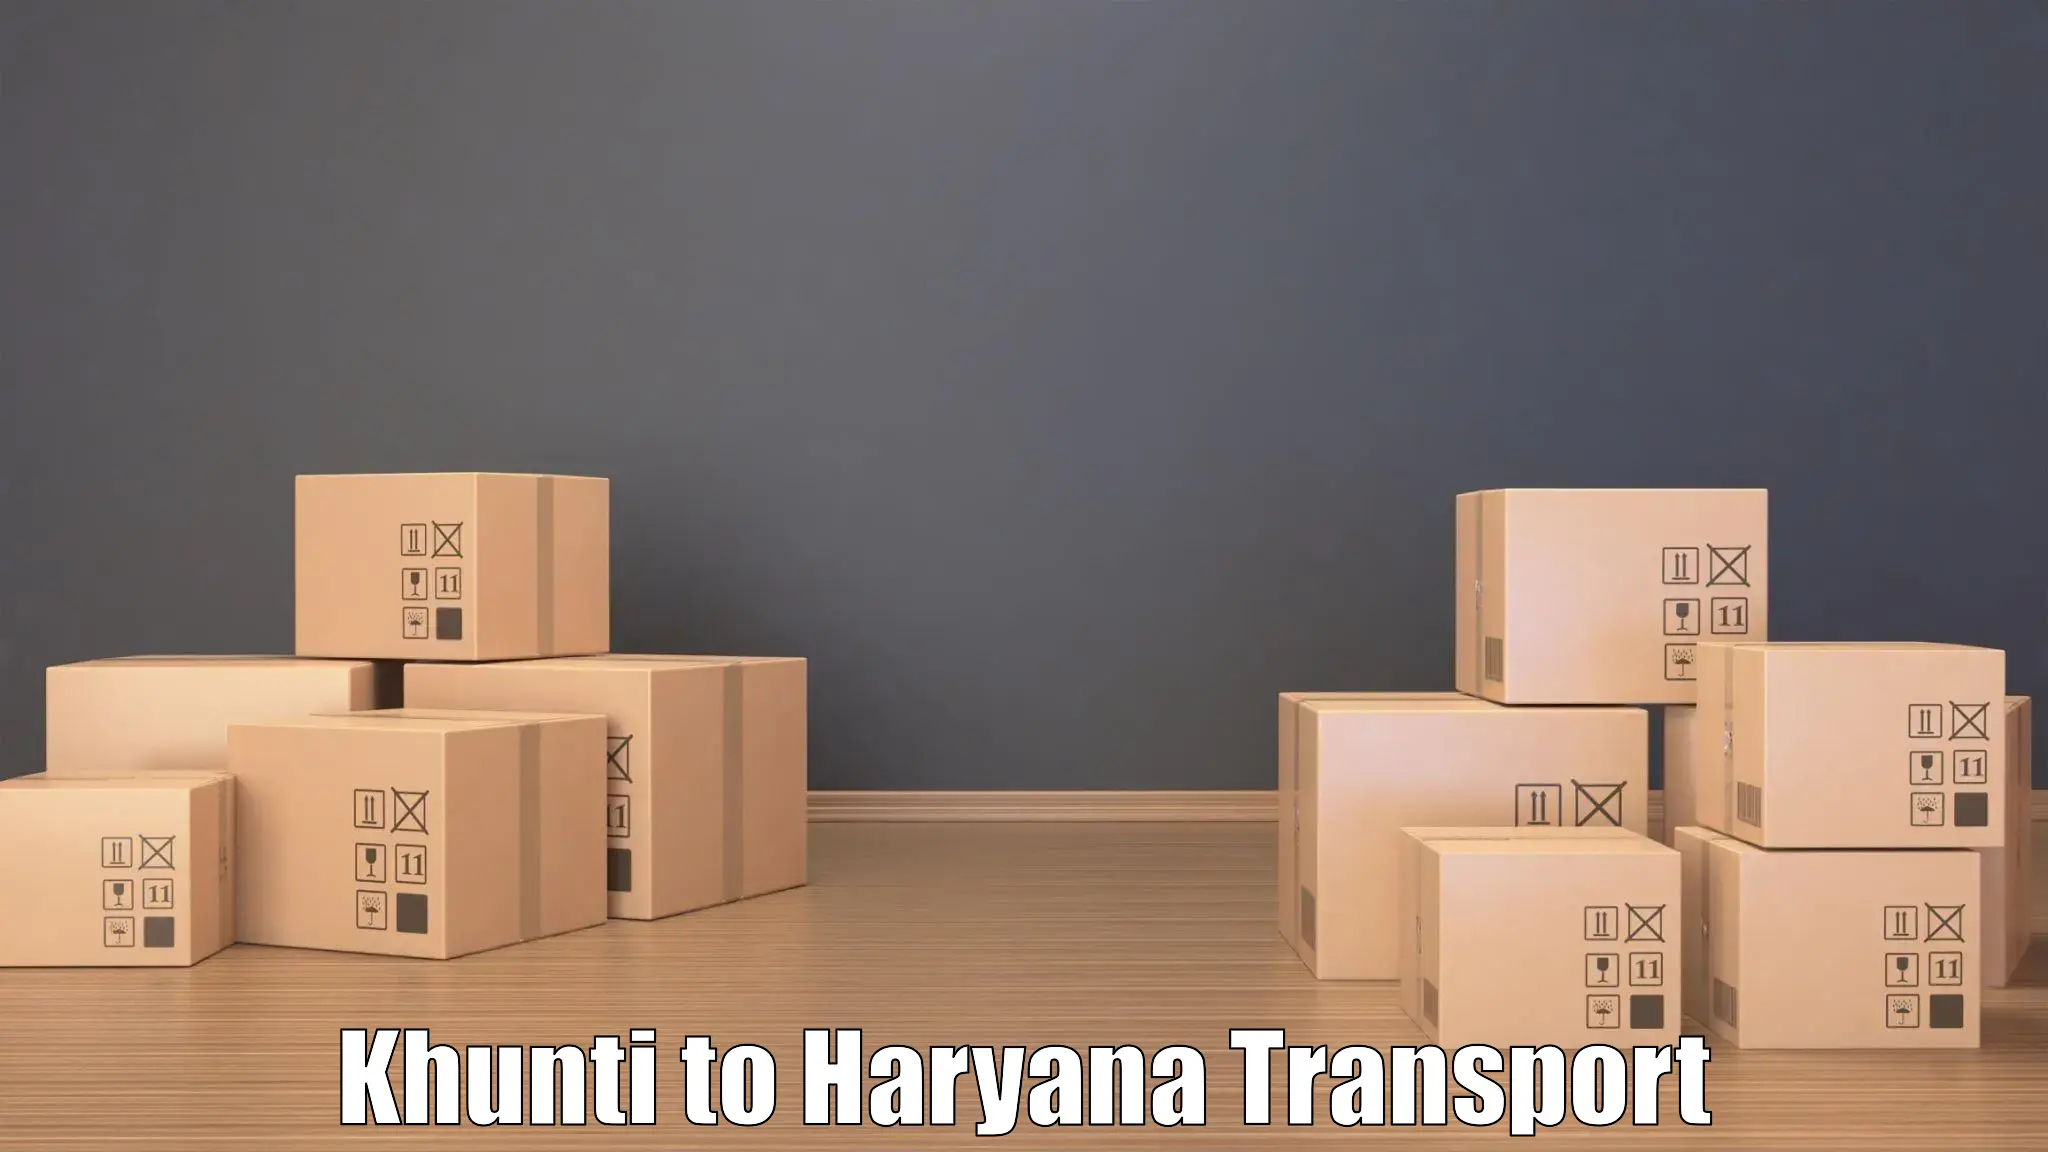 Container transportation services Khunti to Bilaspur Haryana